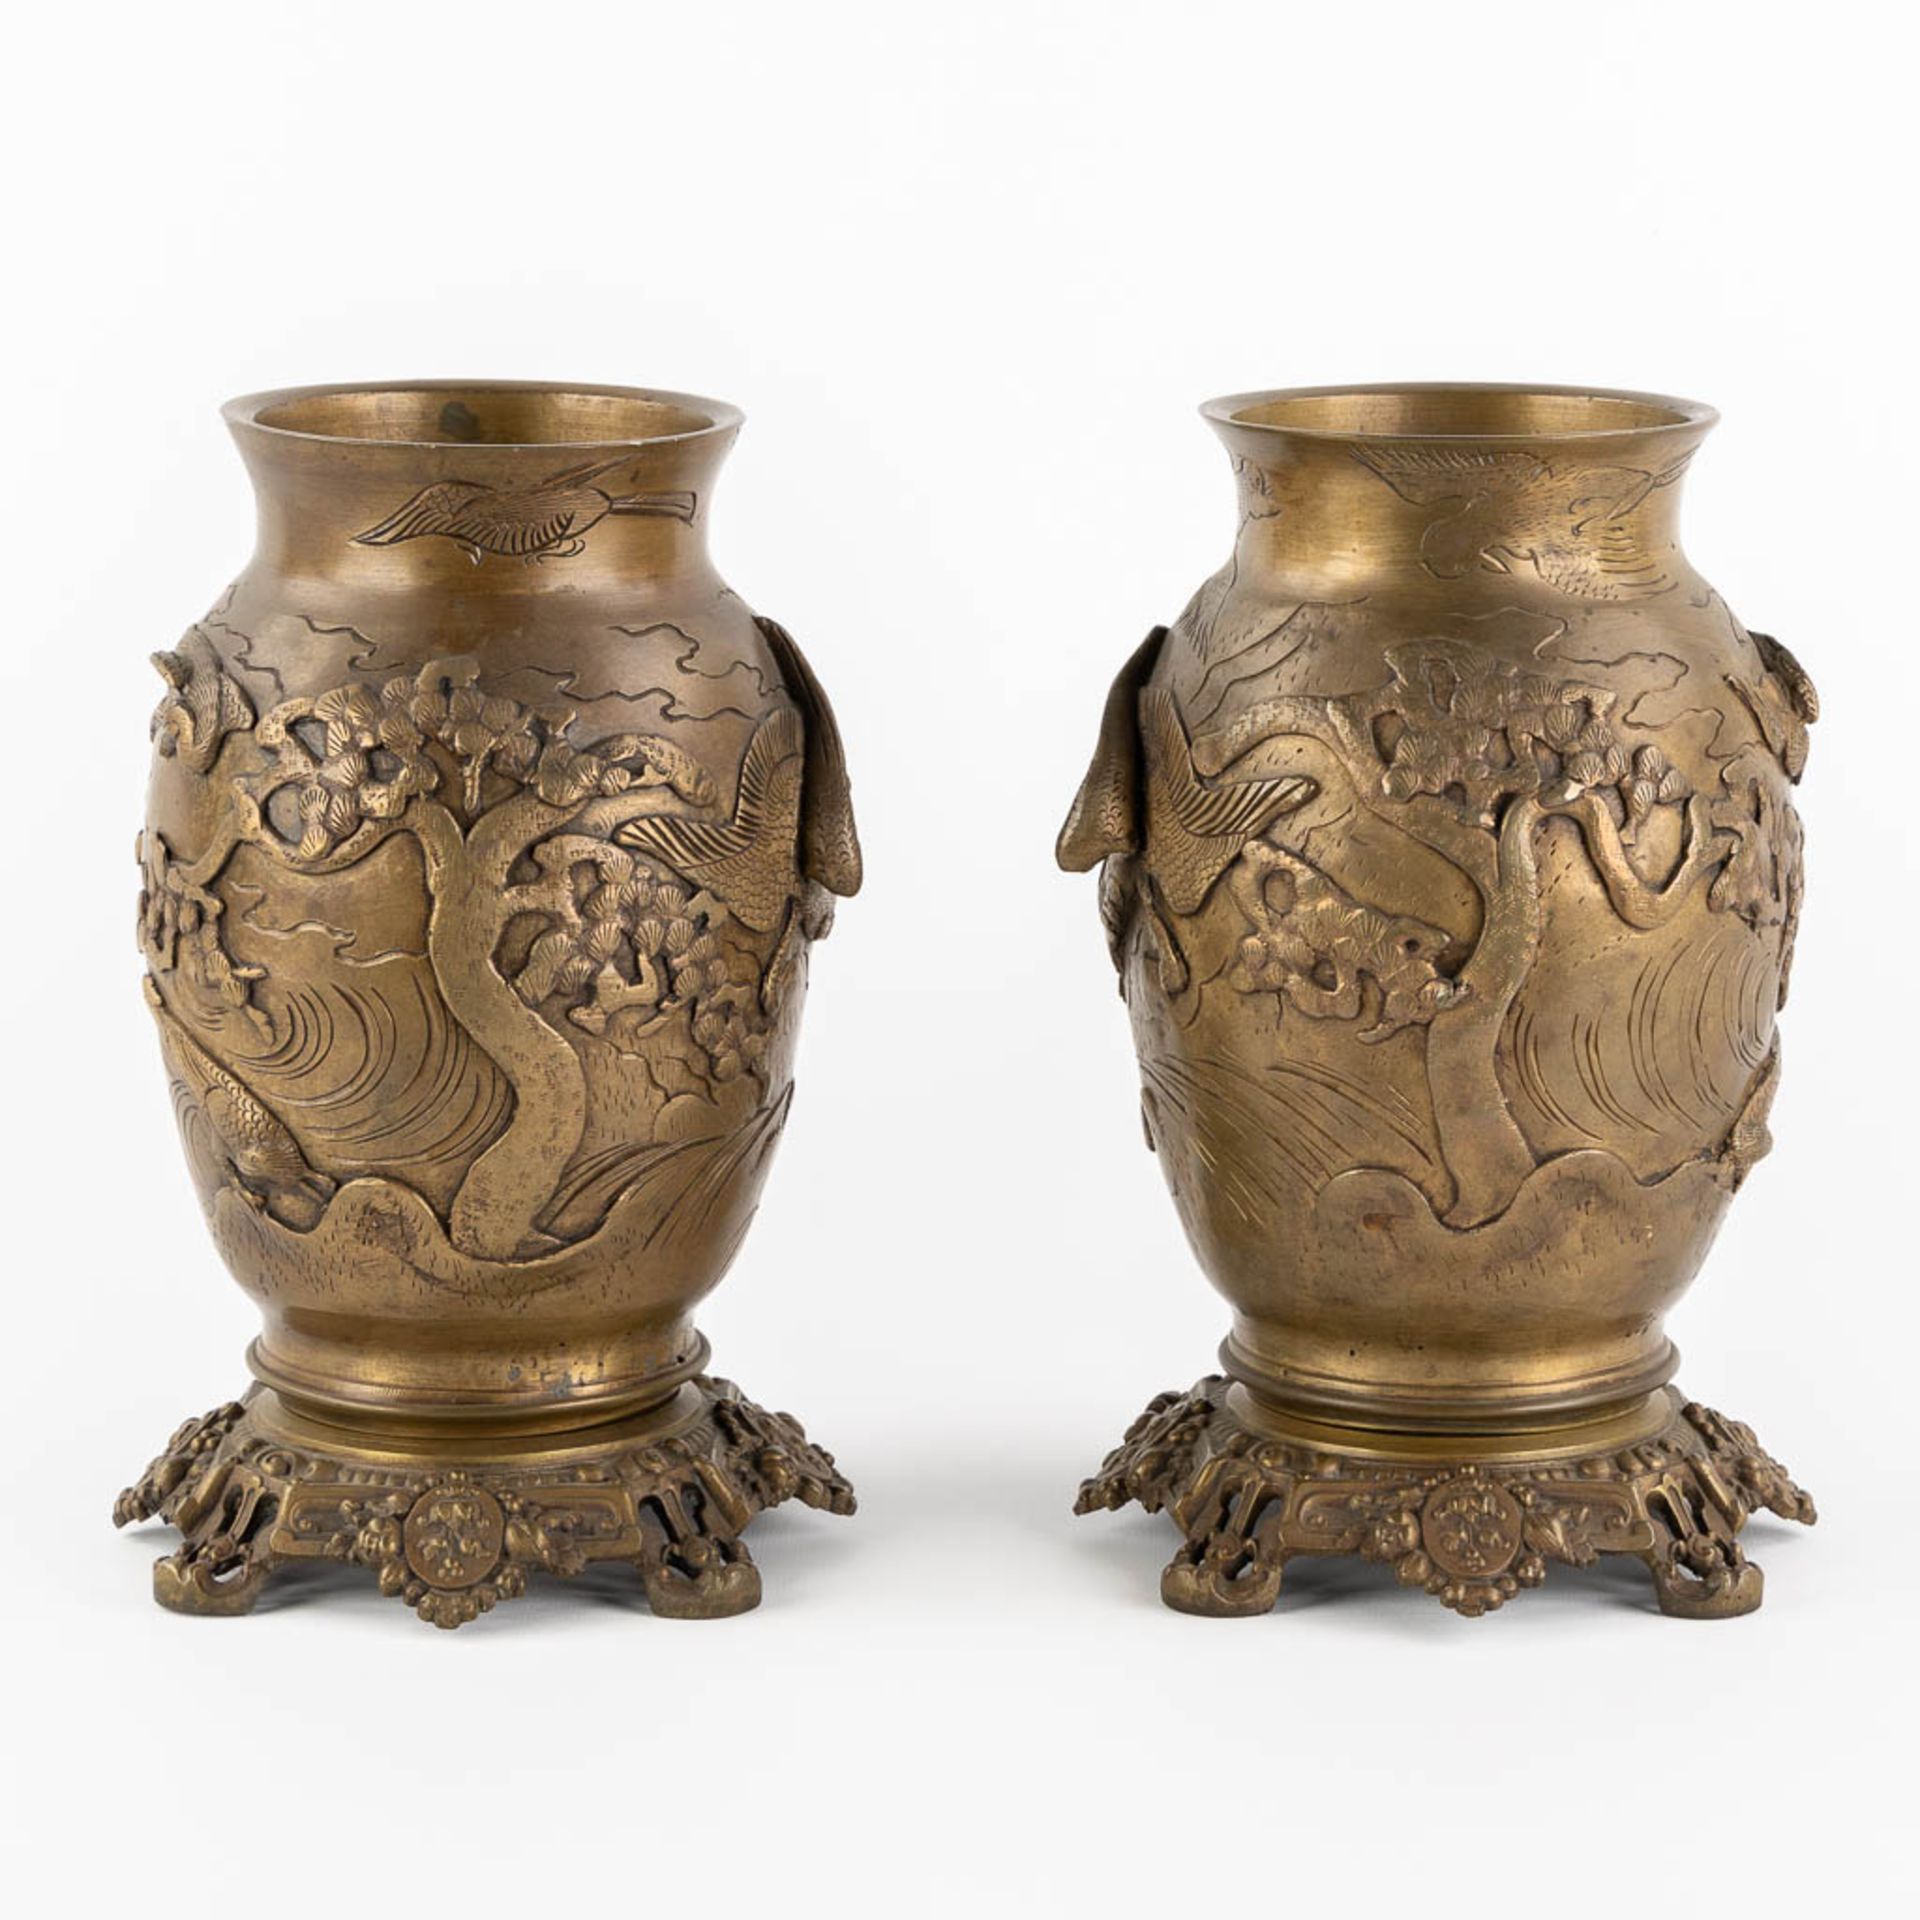 A pair of Oriental vases, depicting flying birds and trees. Patinated bronze. (H:27 x D:16 cm) - Bild 3 aus 16